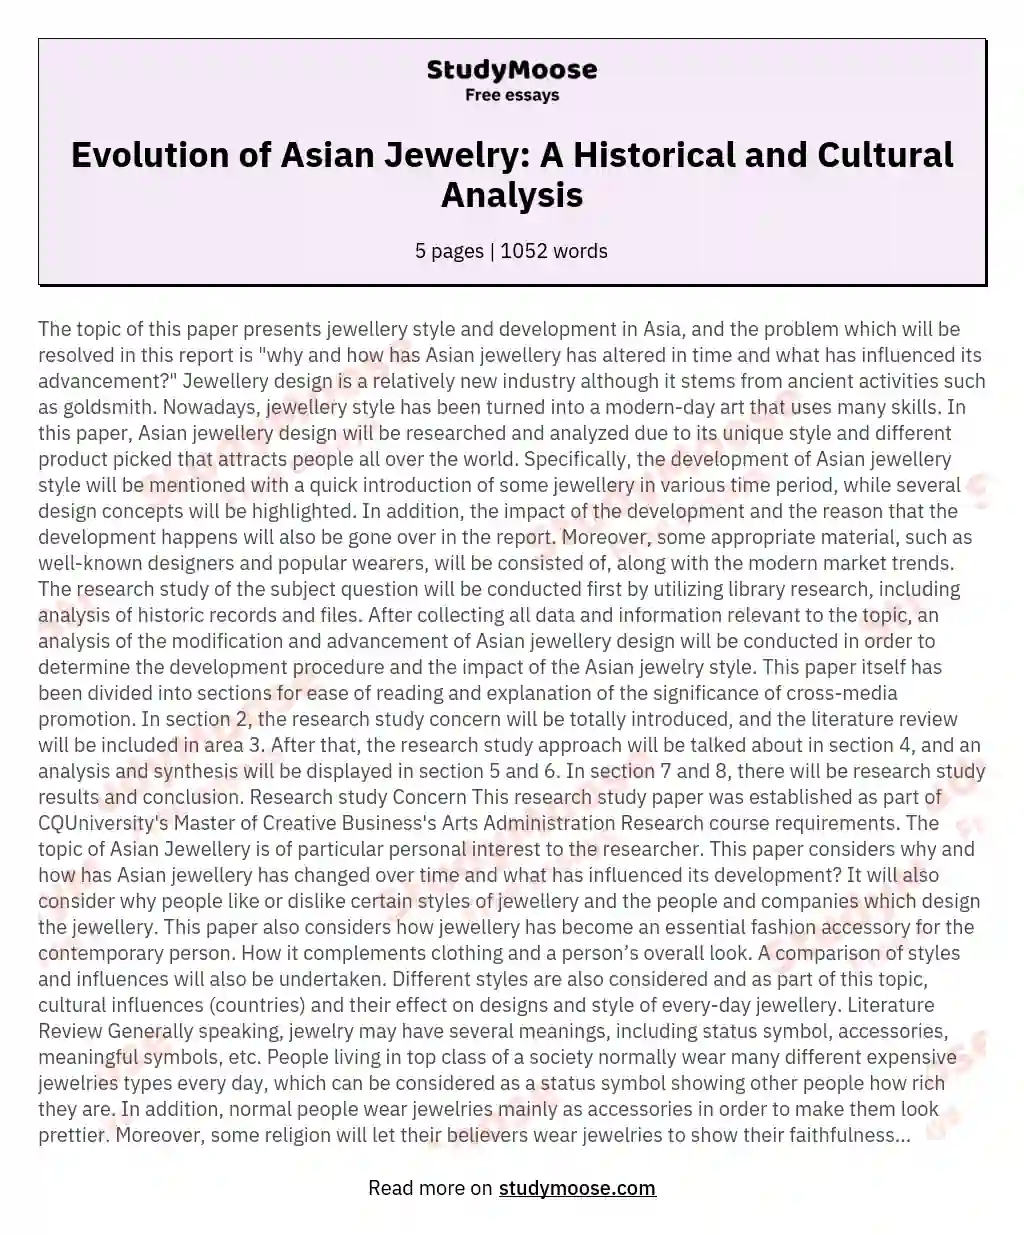 Evolution of Asian Jewelry: A Historical and Cultural Analysis essay